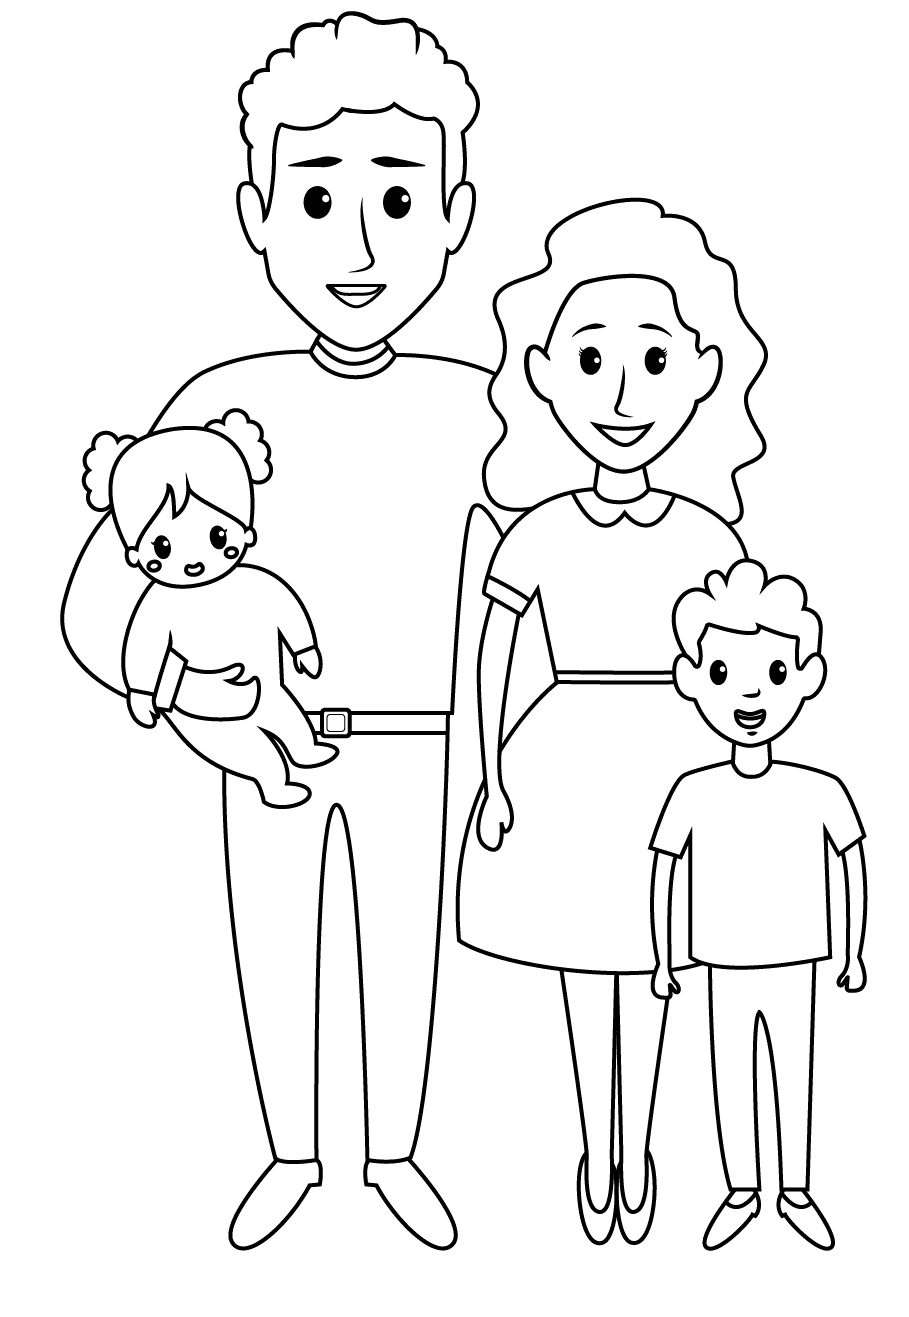 Parents and Two Children Coloring Pages